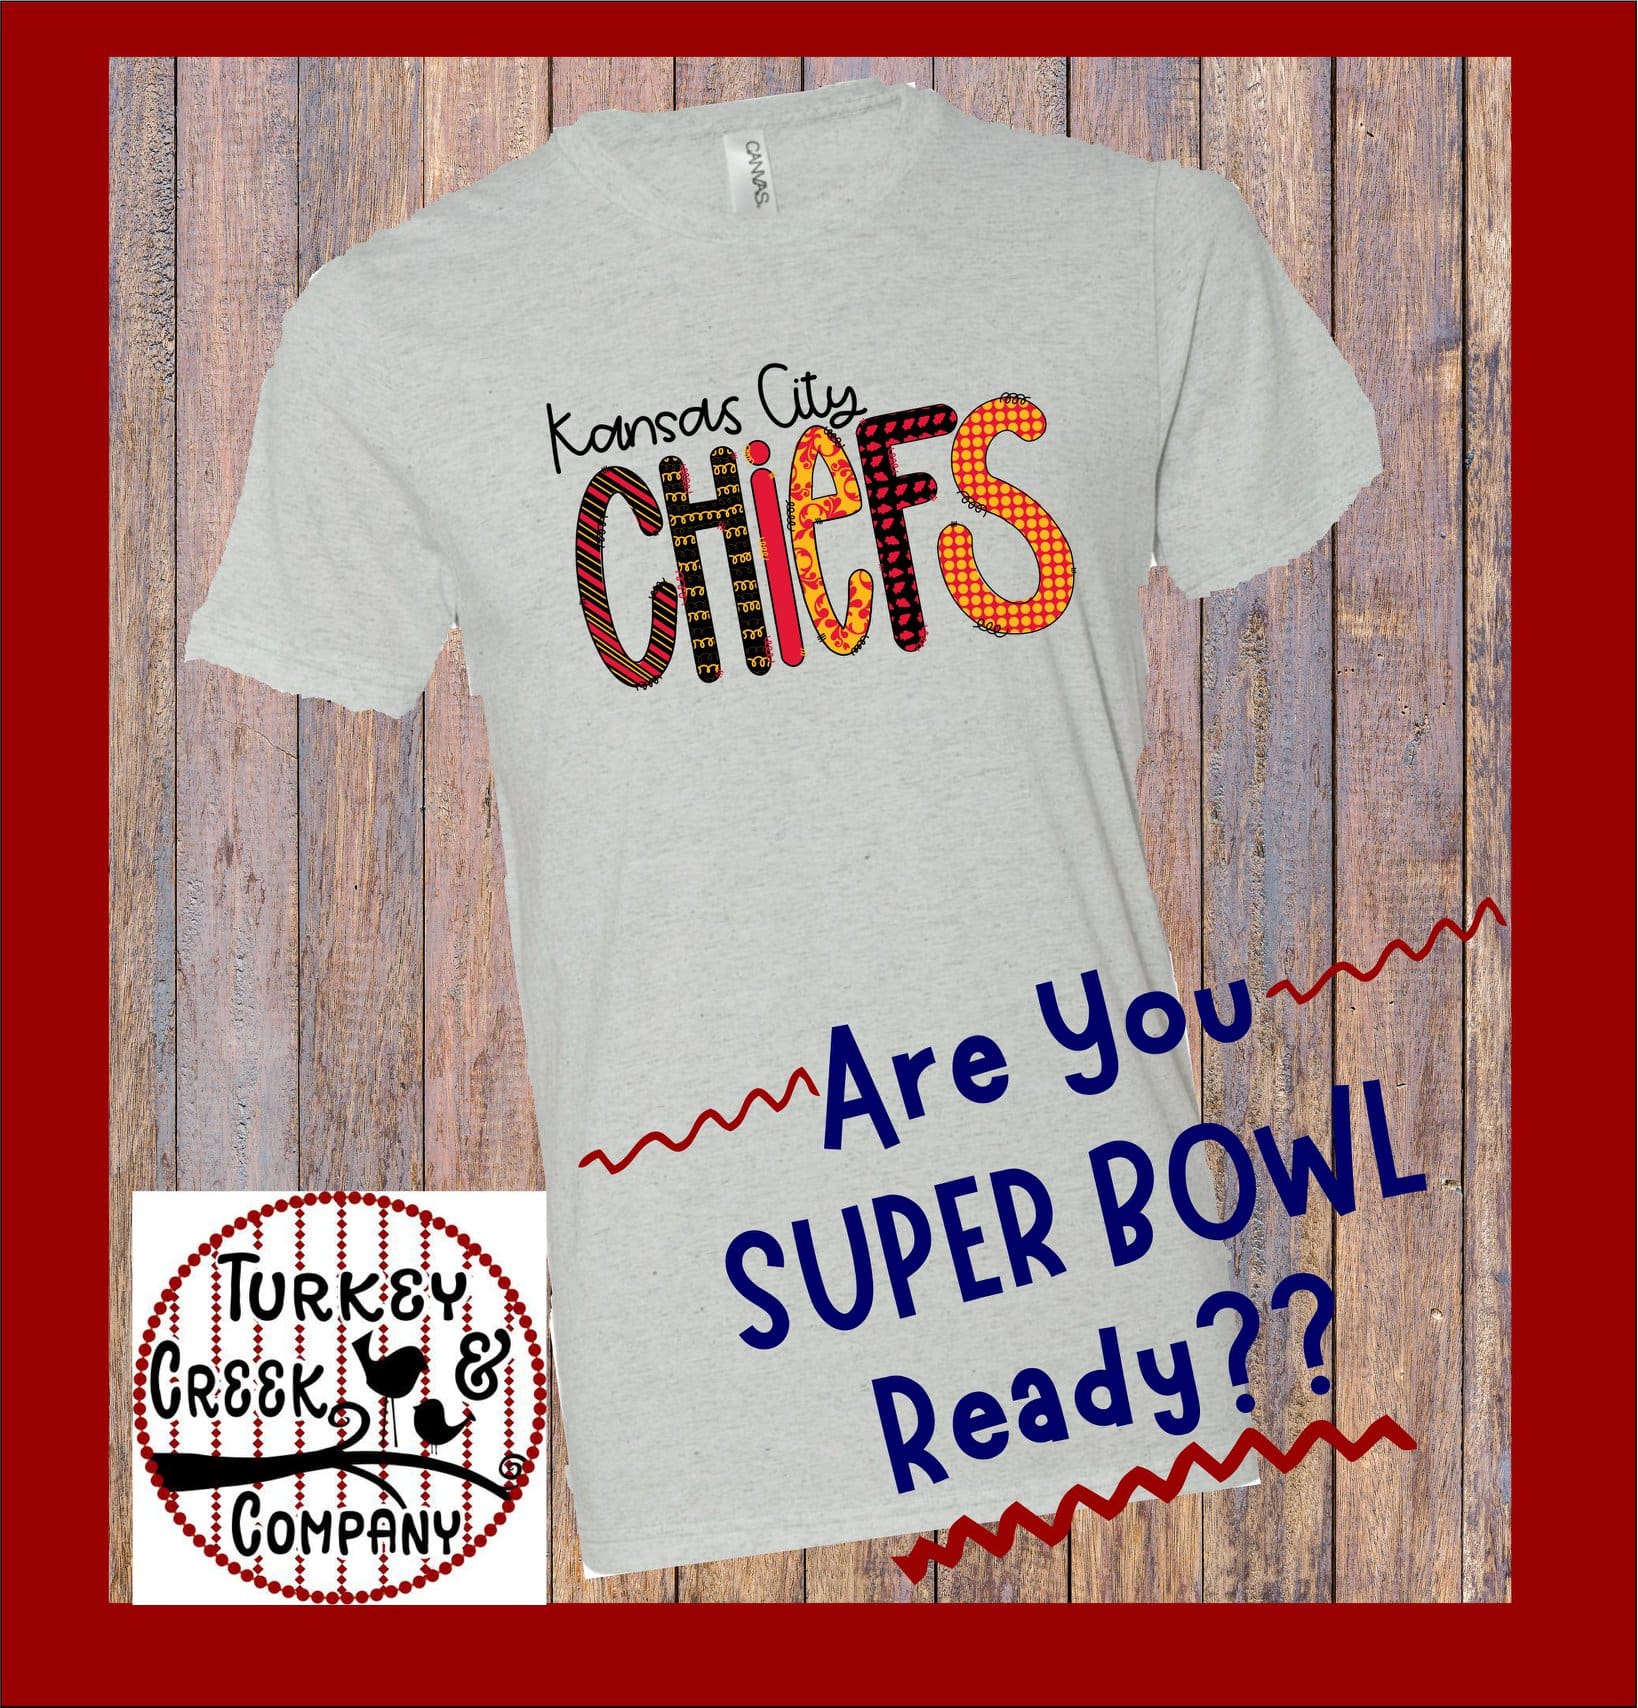 HEY CHIEF FANS ARE YOU SUPER BOWL READY